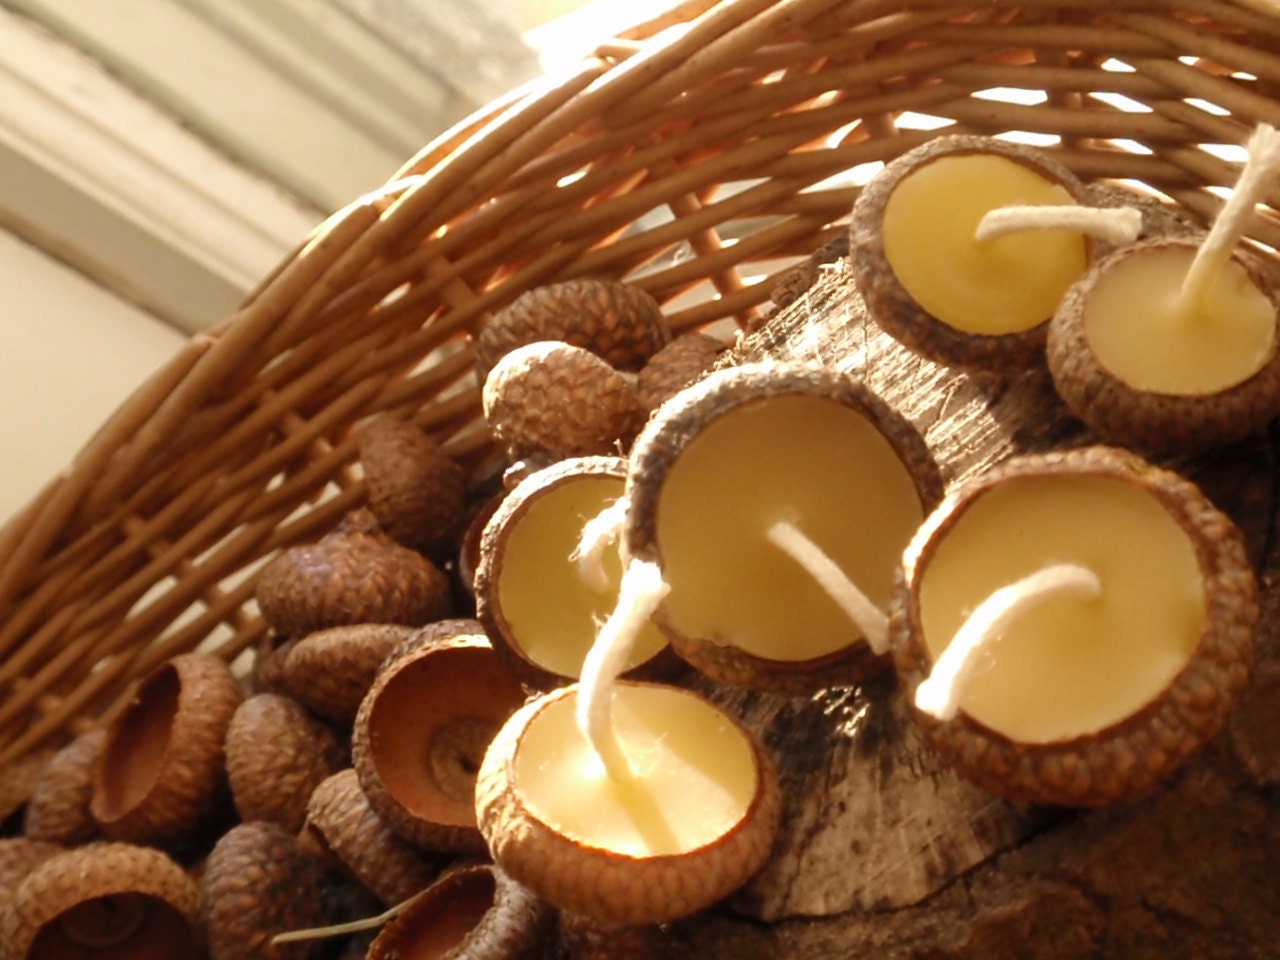 Acorn cap candles - woodland /the littlest lights/ floating candles